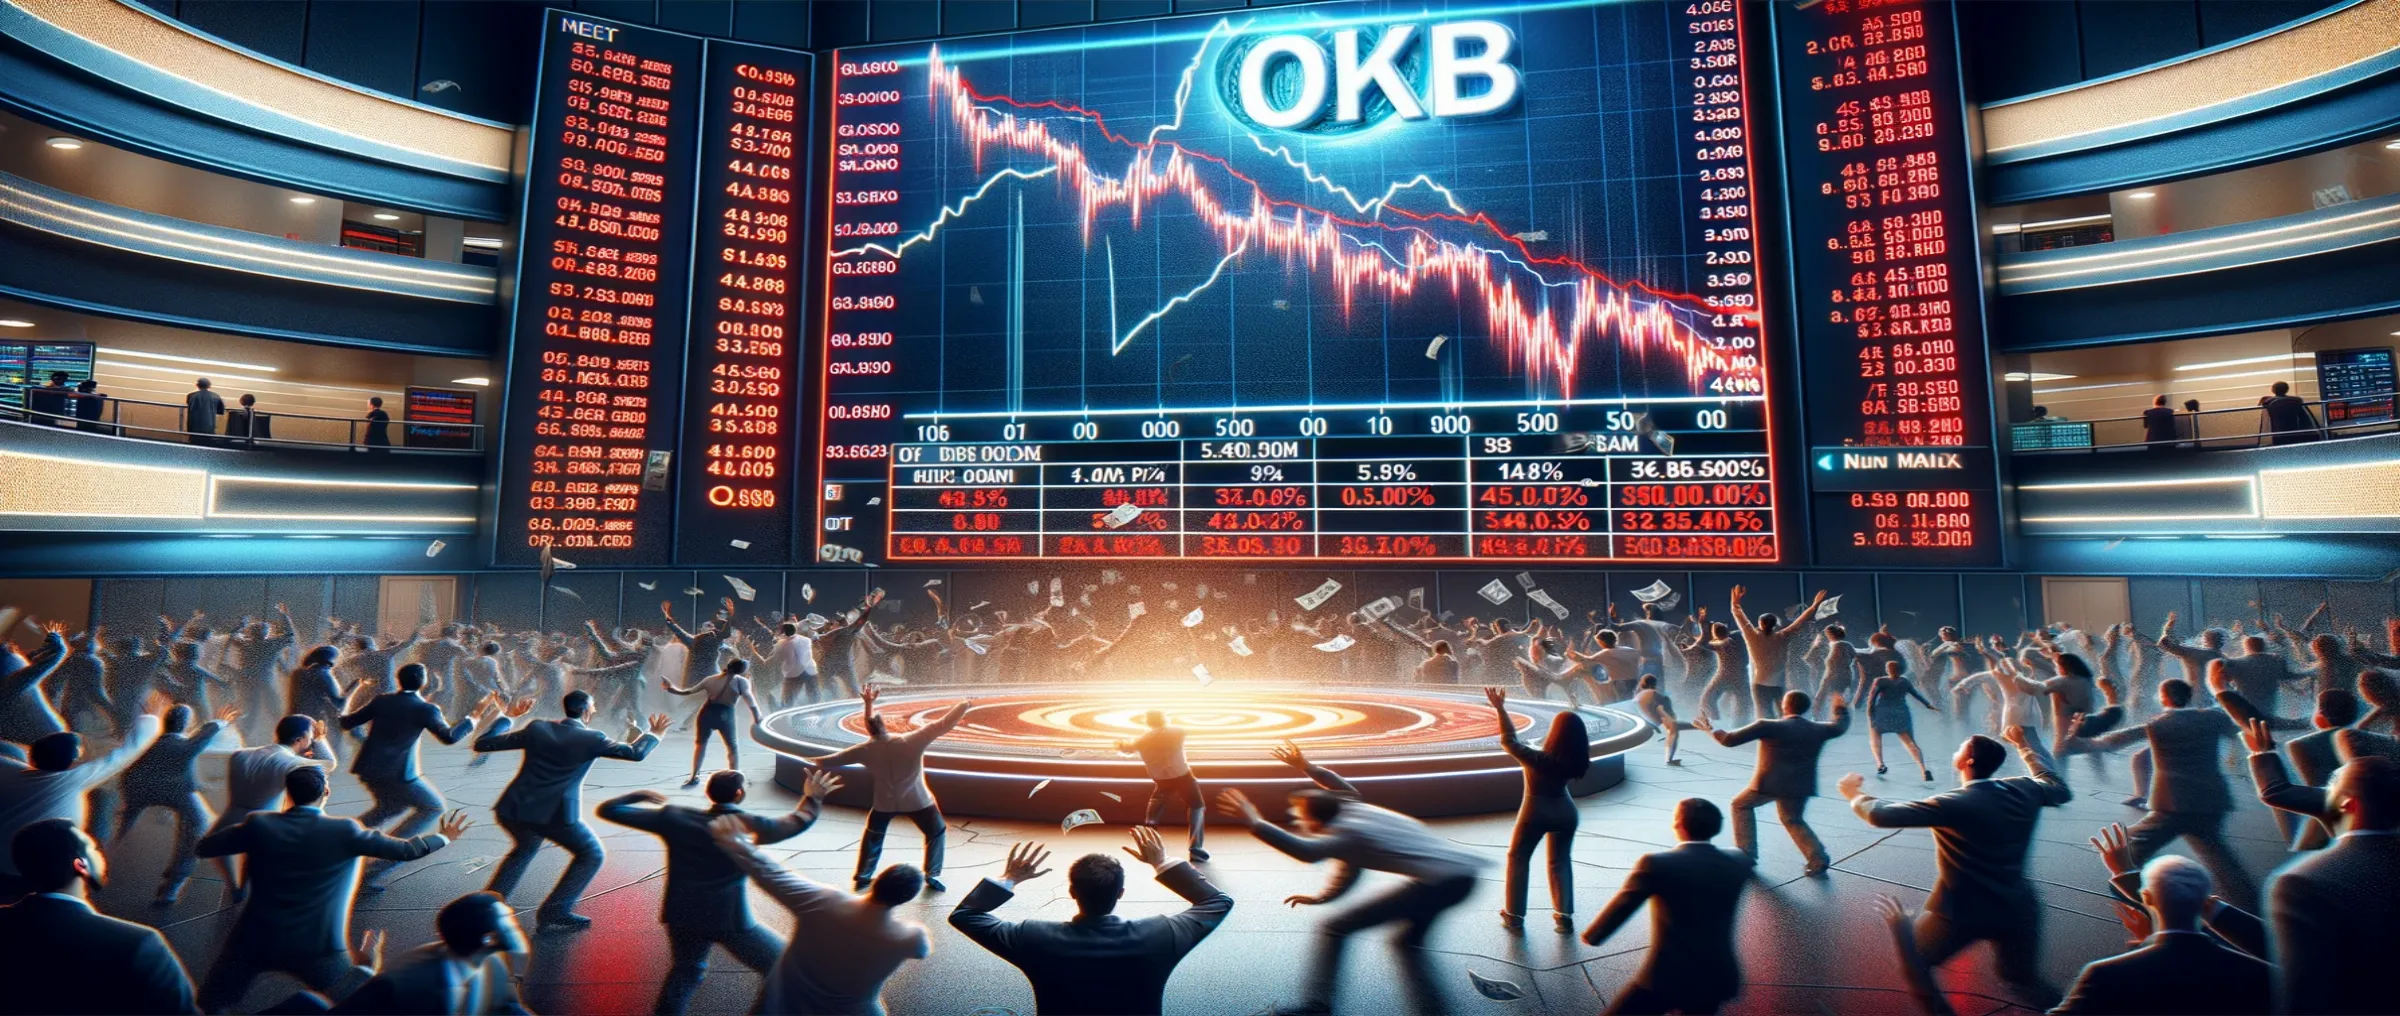 The OKB token rate dropped by 50% in just 10 minutes